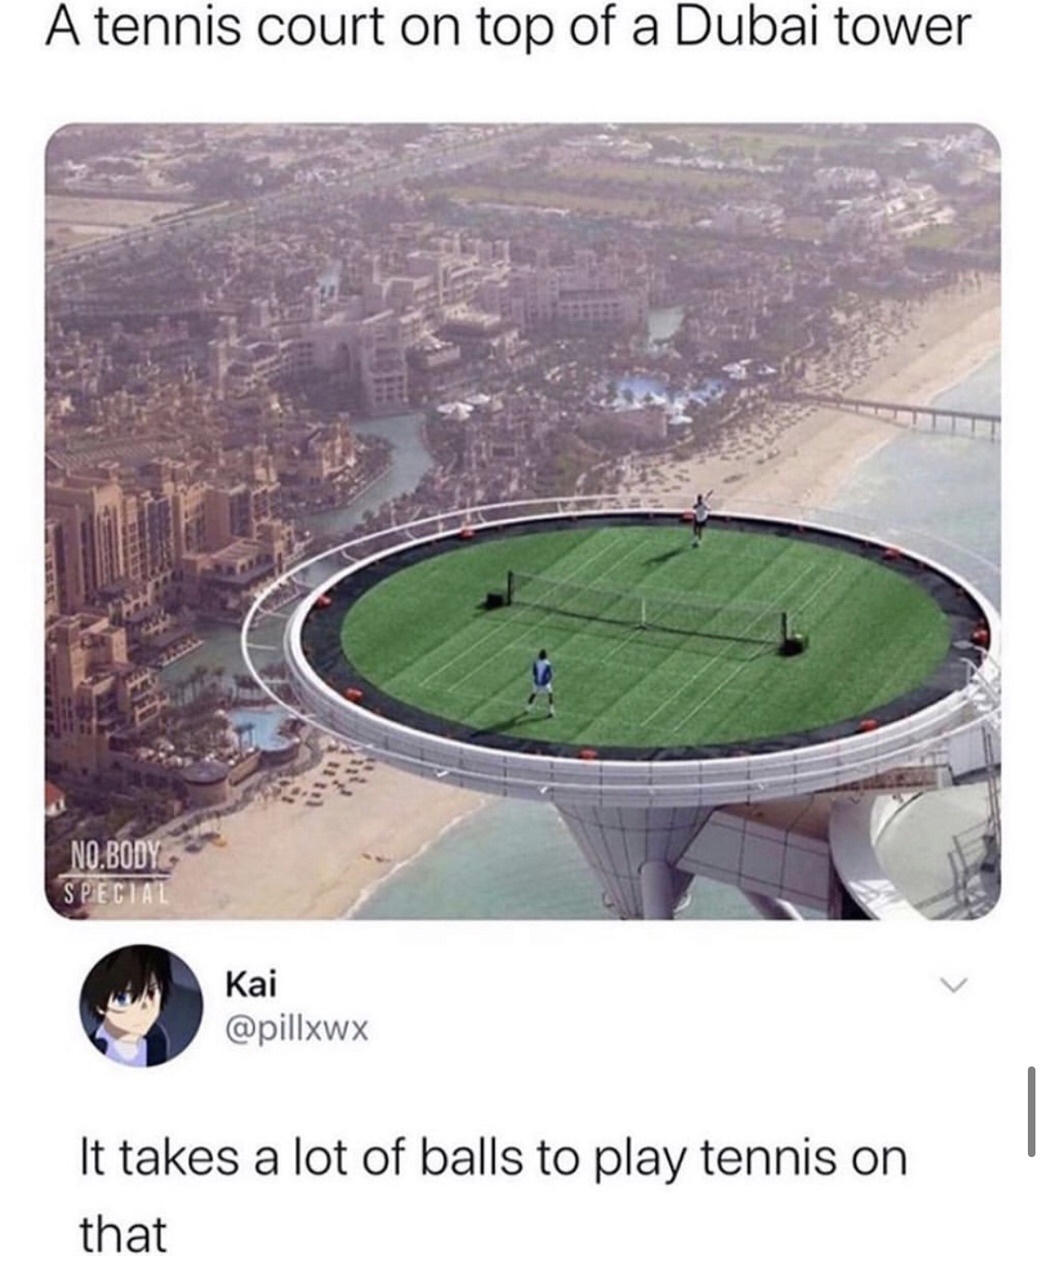 burj al arab roof - A tennis court on top of a Dubai tower No.Body Special Kai It takes a lot of balls to play tennis on that